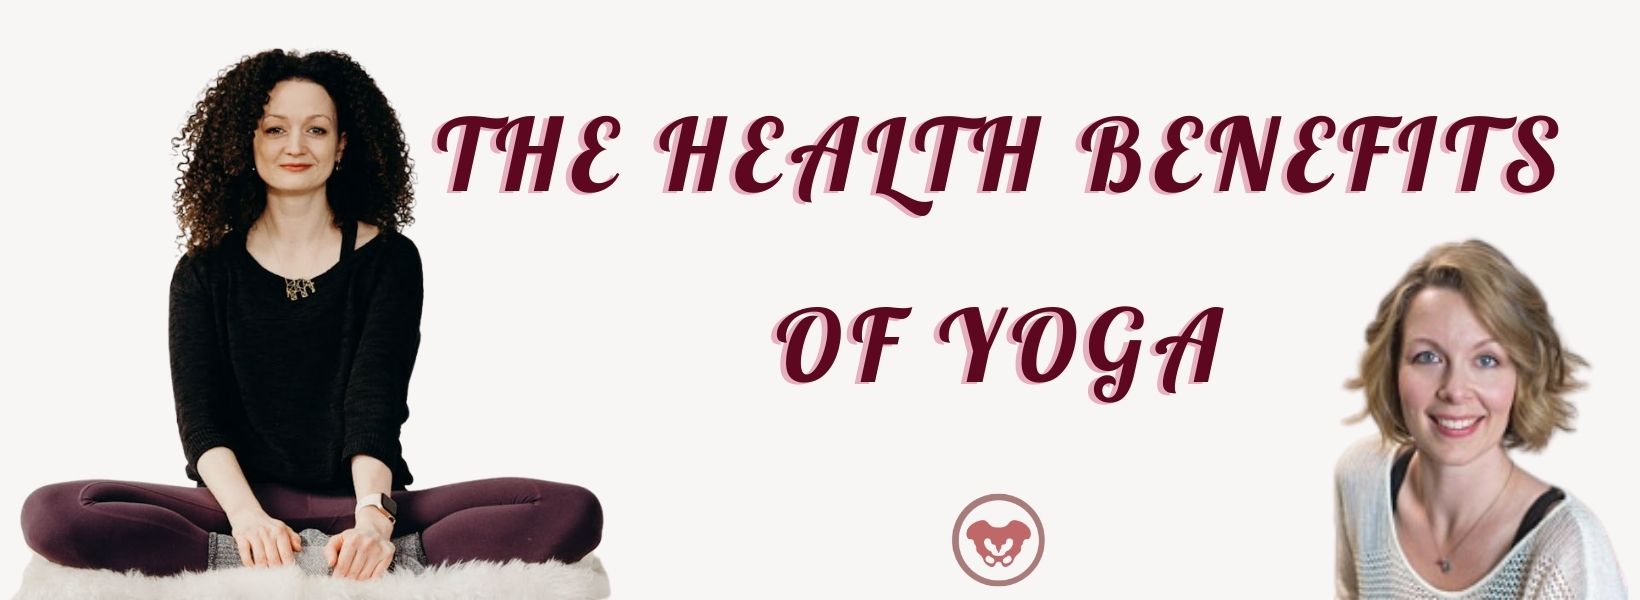 The health benefits of yoga 600 600 px 1640 600 px